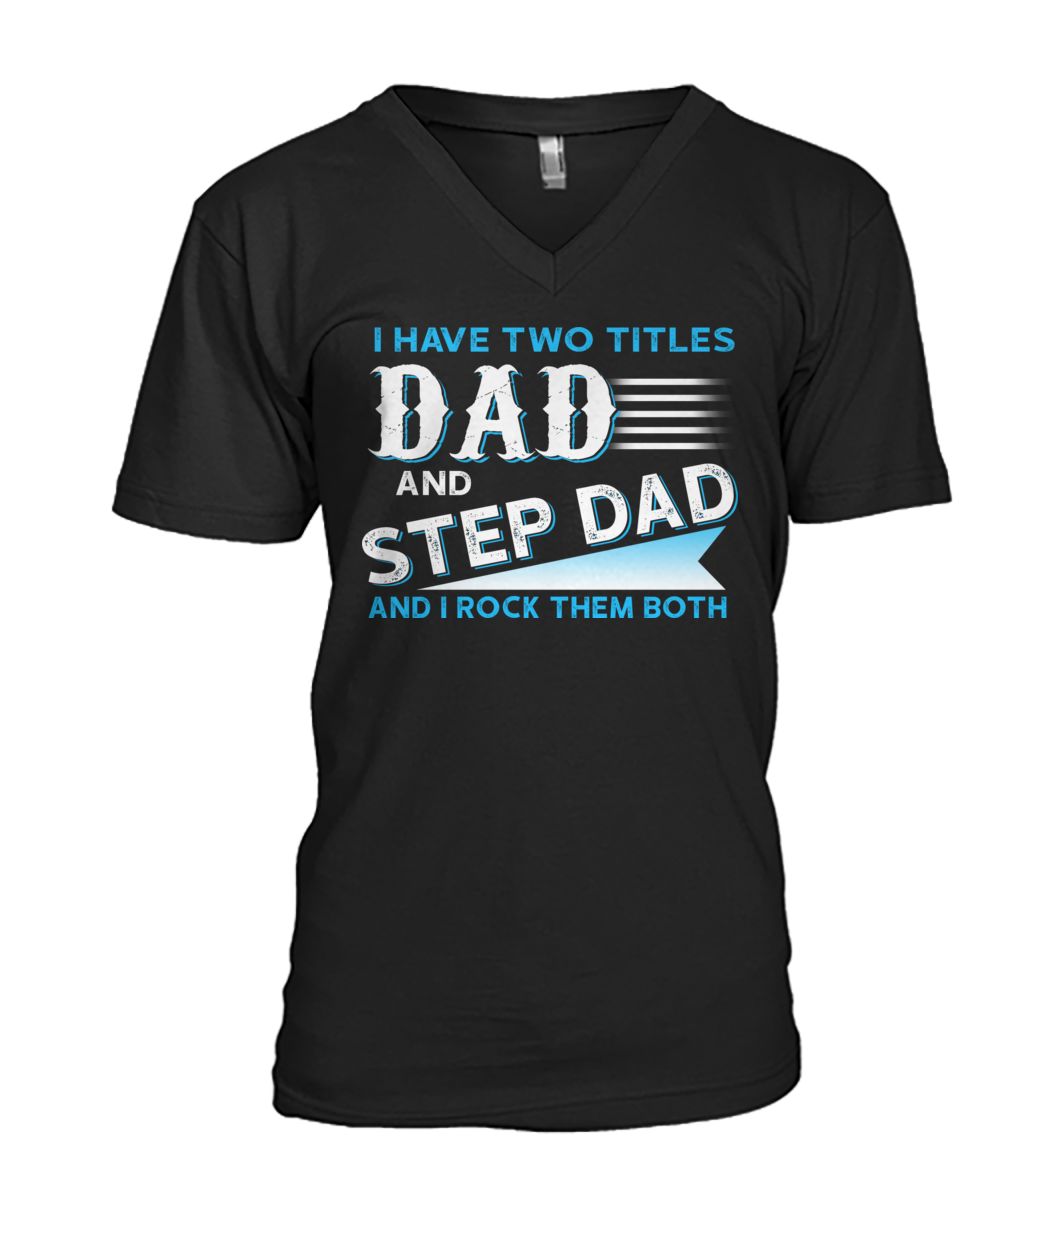 I have two titles dad and stepdad and I rock them both father's day mens v-neck